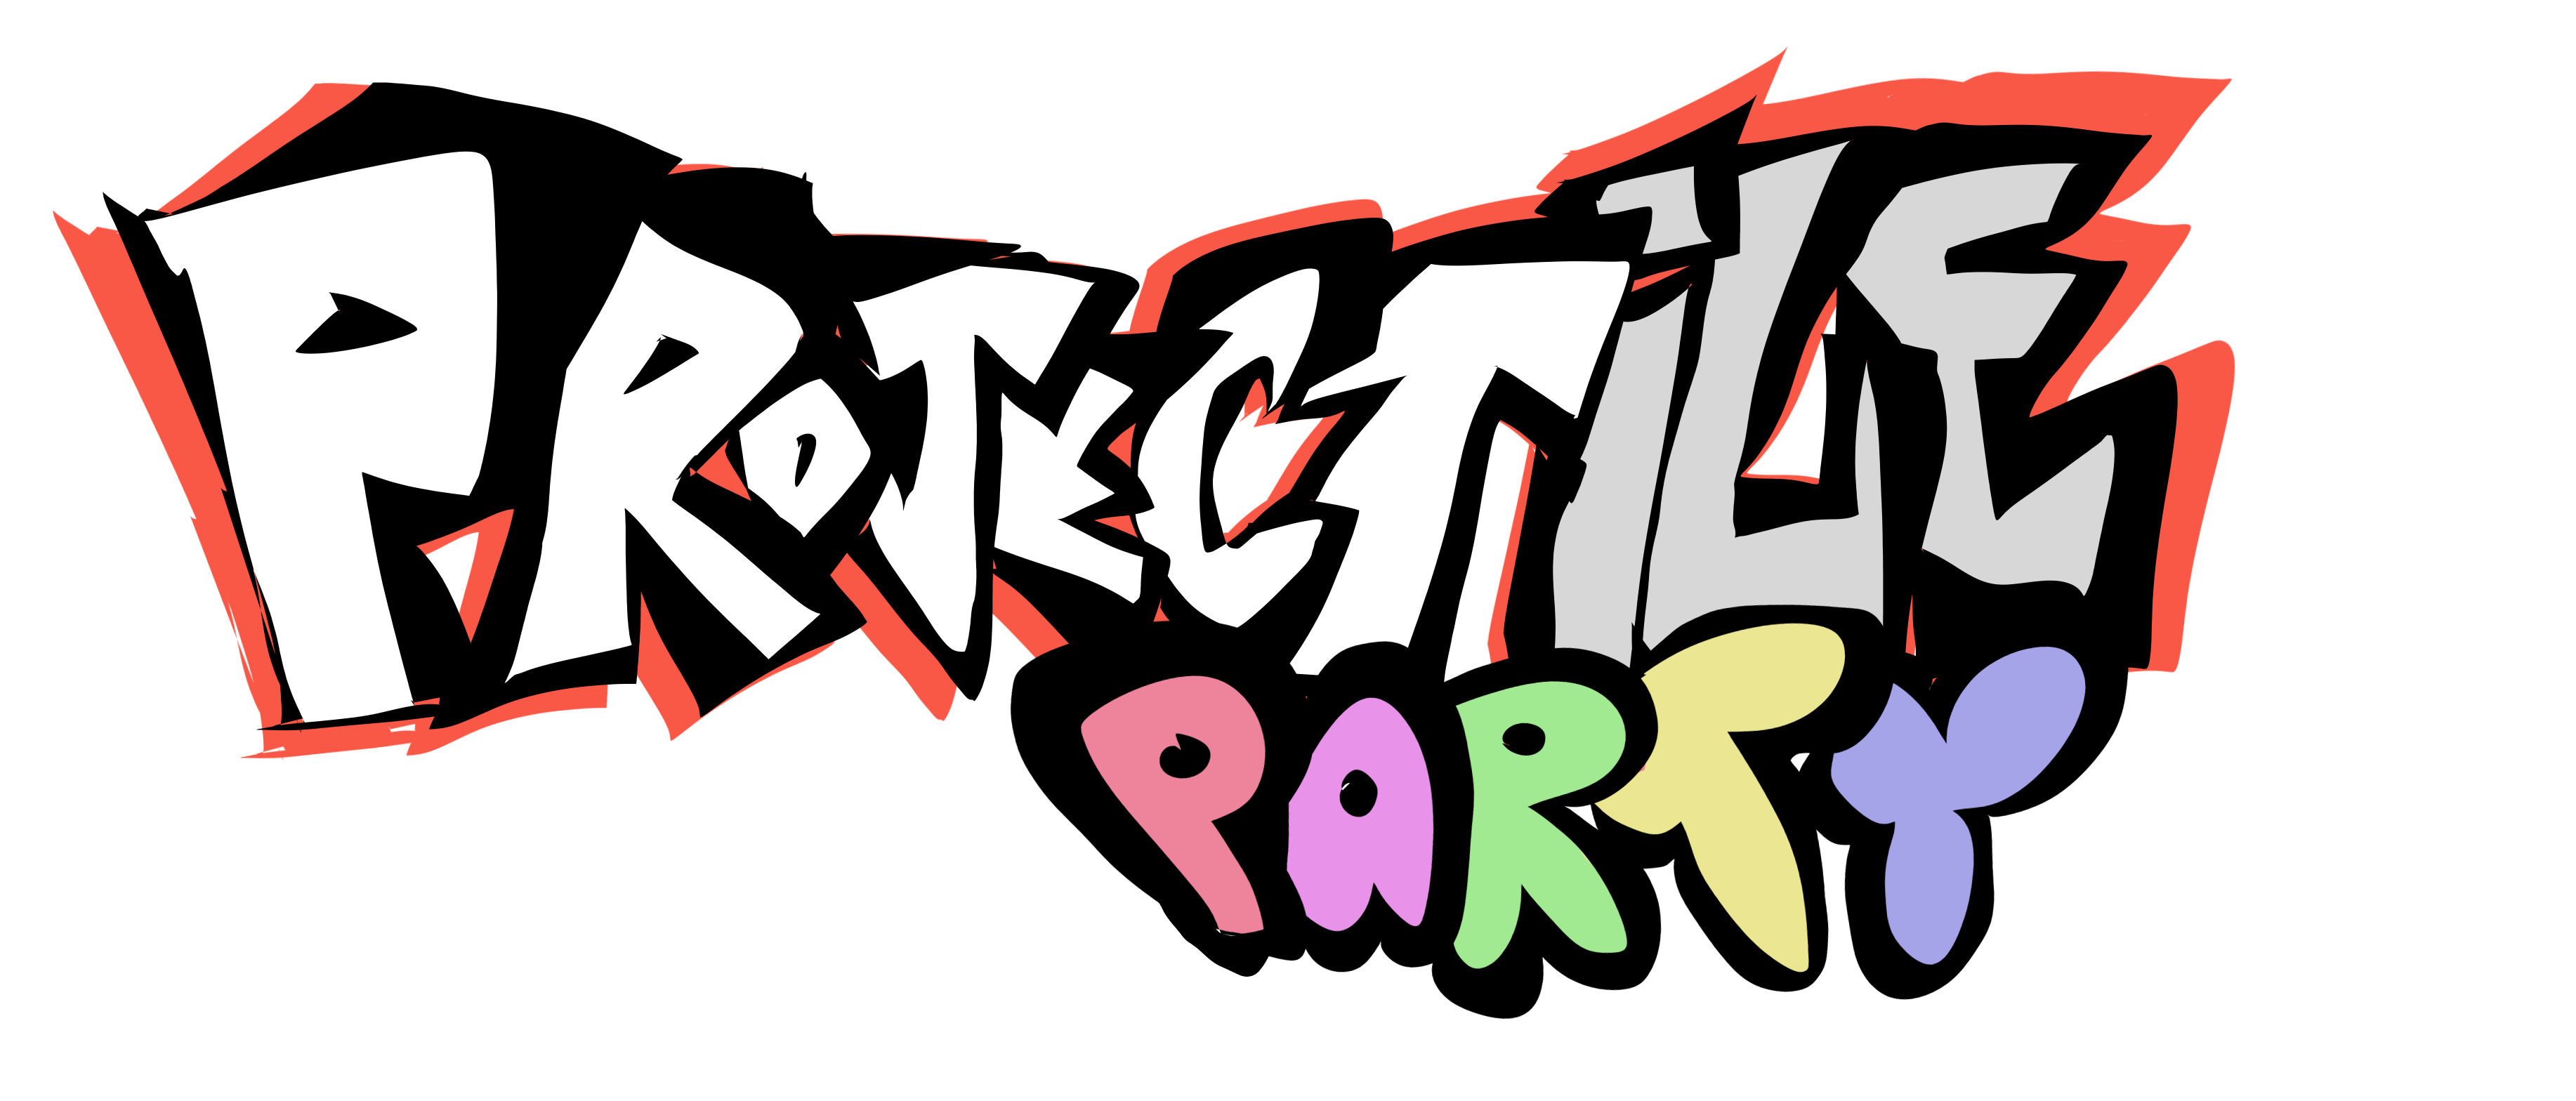 Projectile party - Prototype